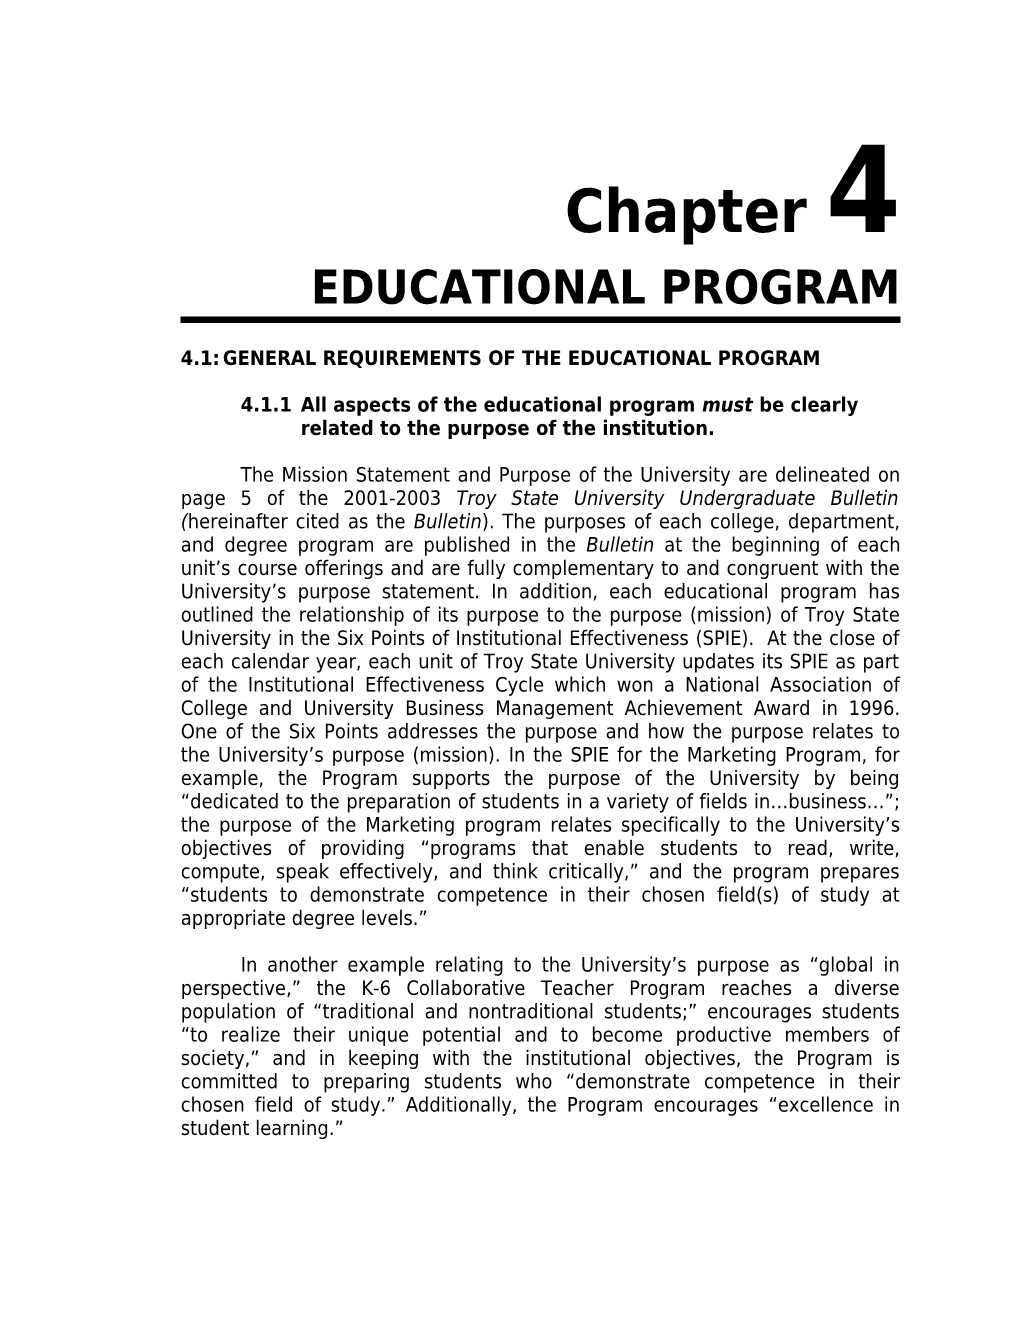 4.1:General Requirements of the Educational Program